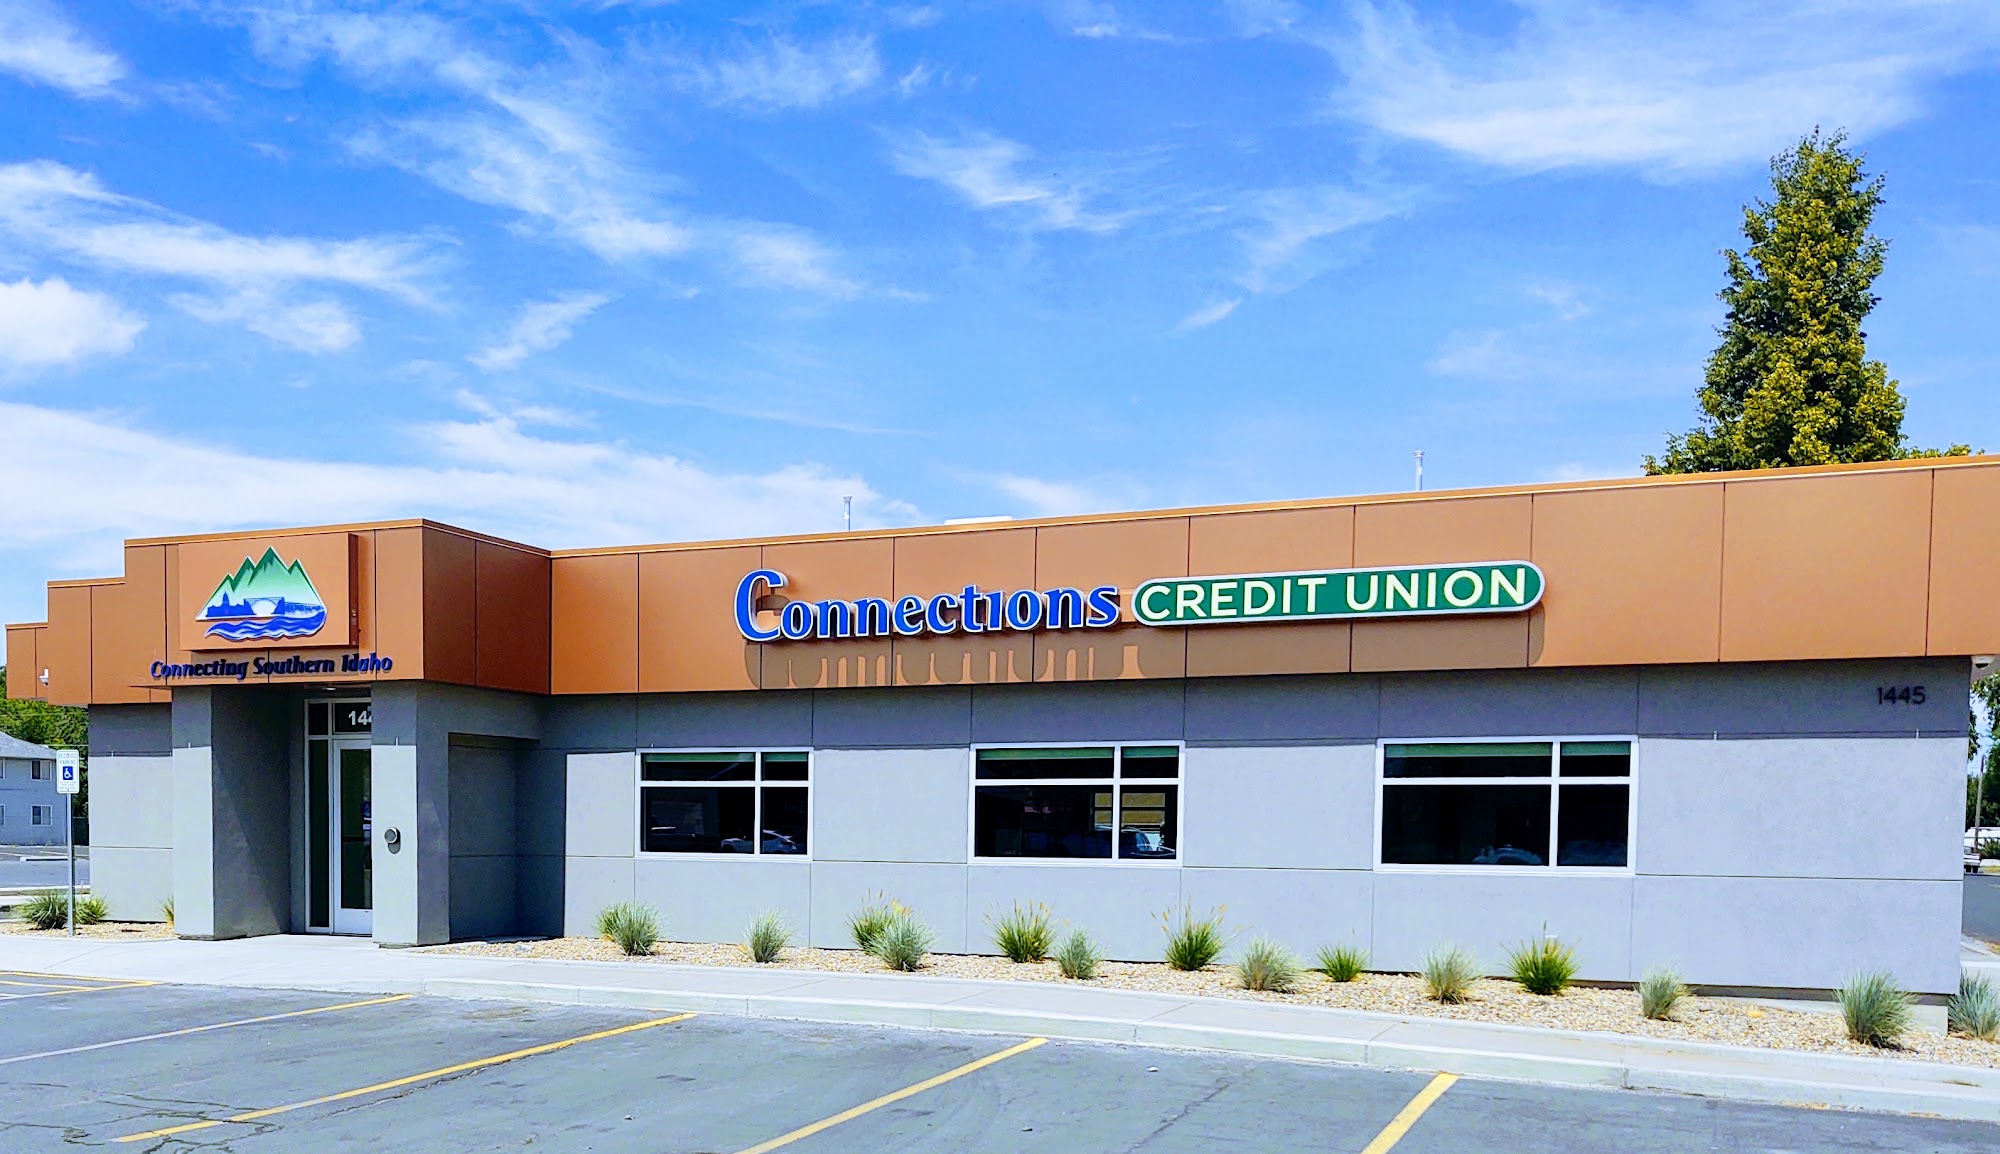 Connections Credit Union